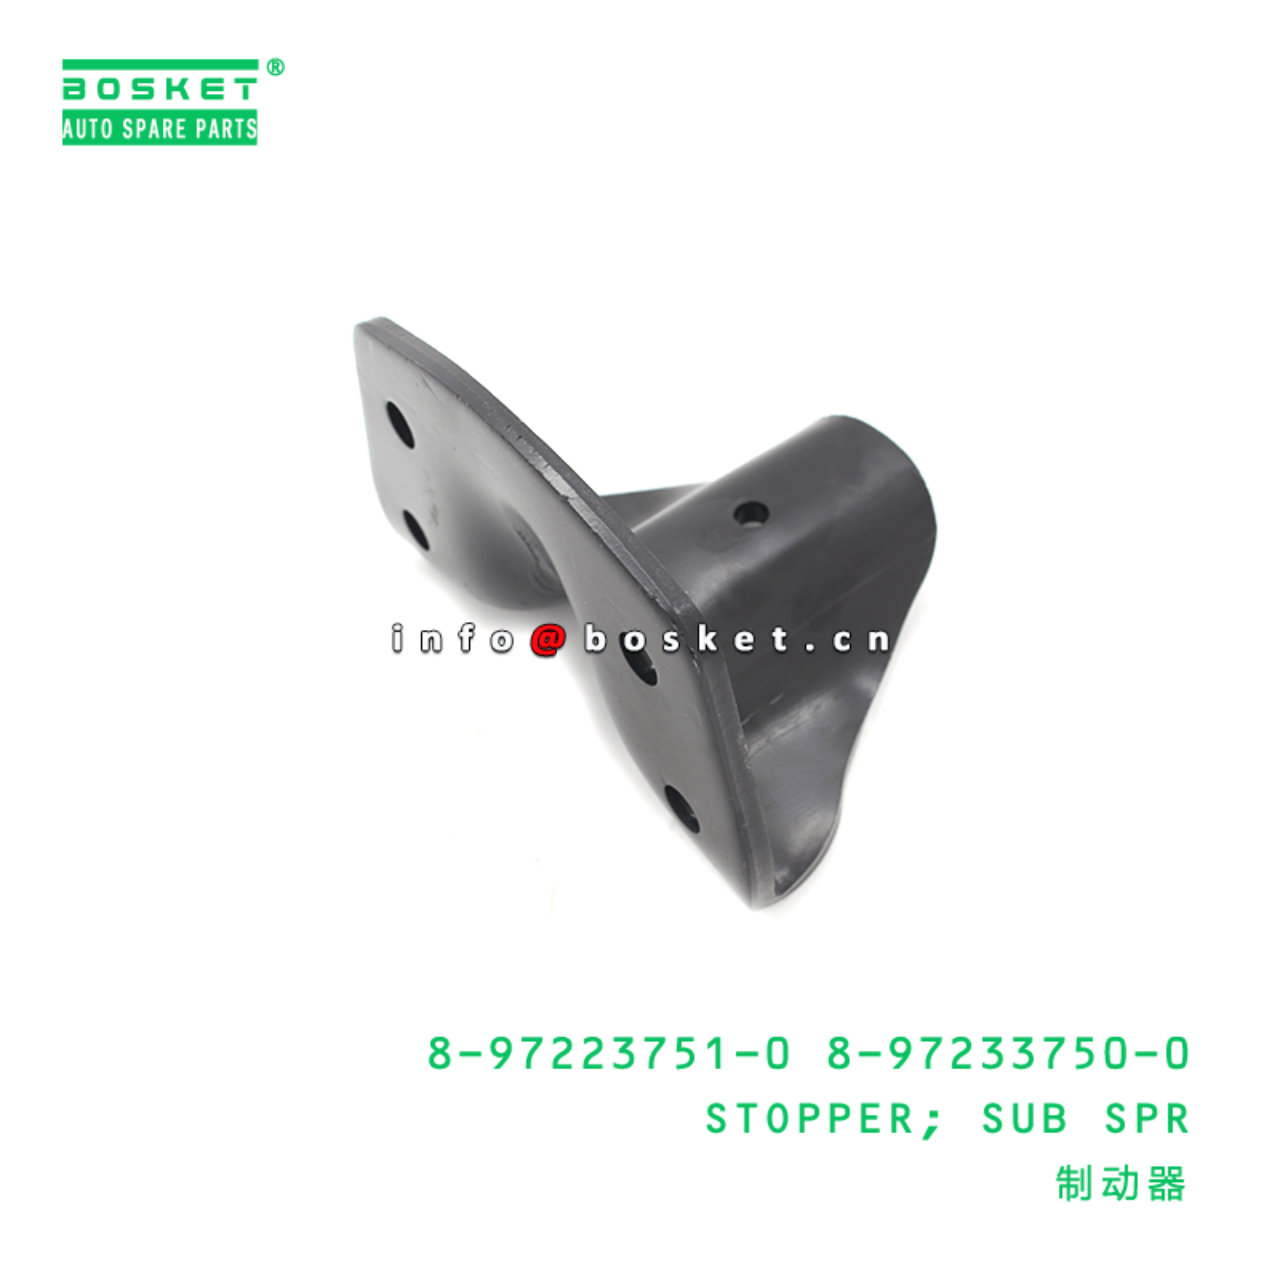 8-97223751-0 8-97233750-0 Sub Spring Stopper 8972237510 8972337500 Suitable for ISUZU NKR 